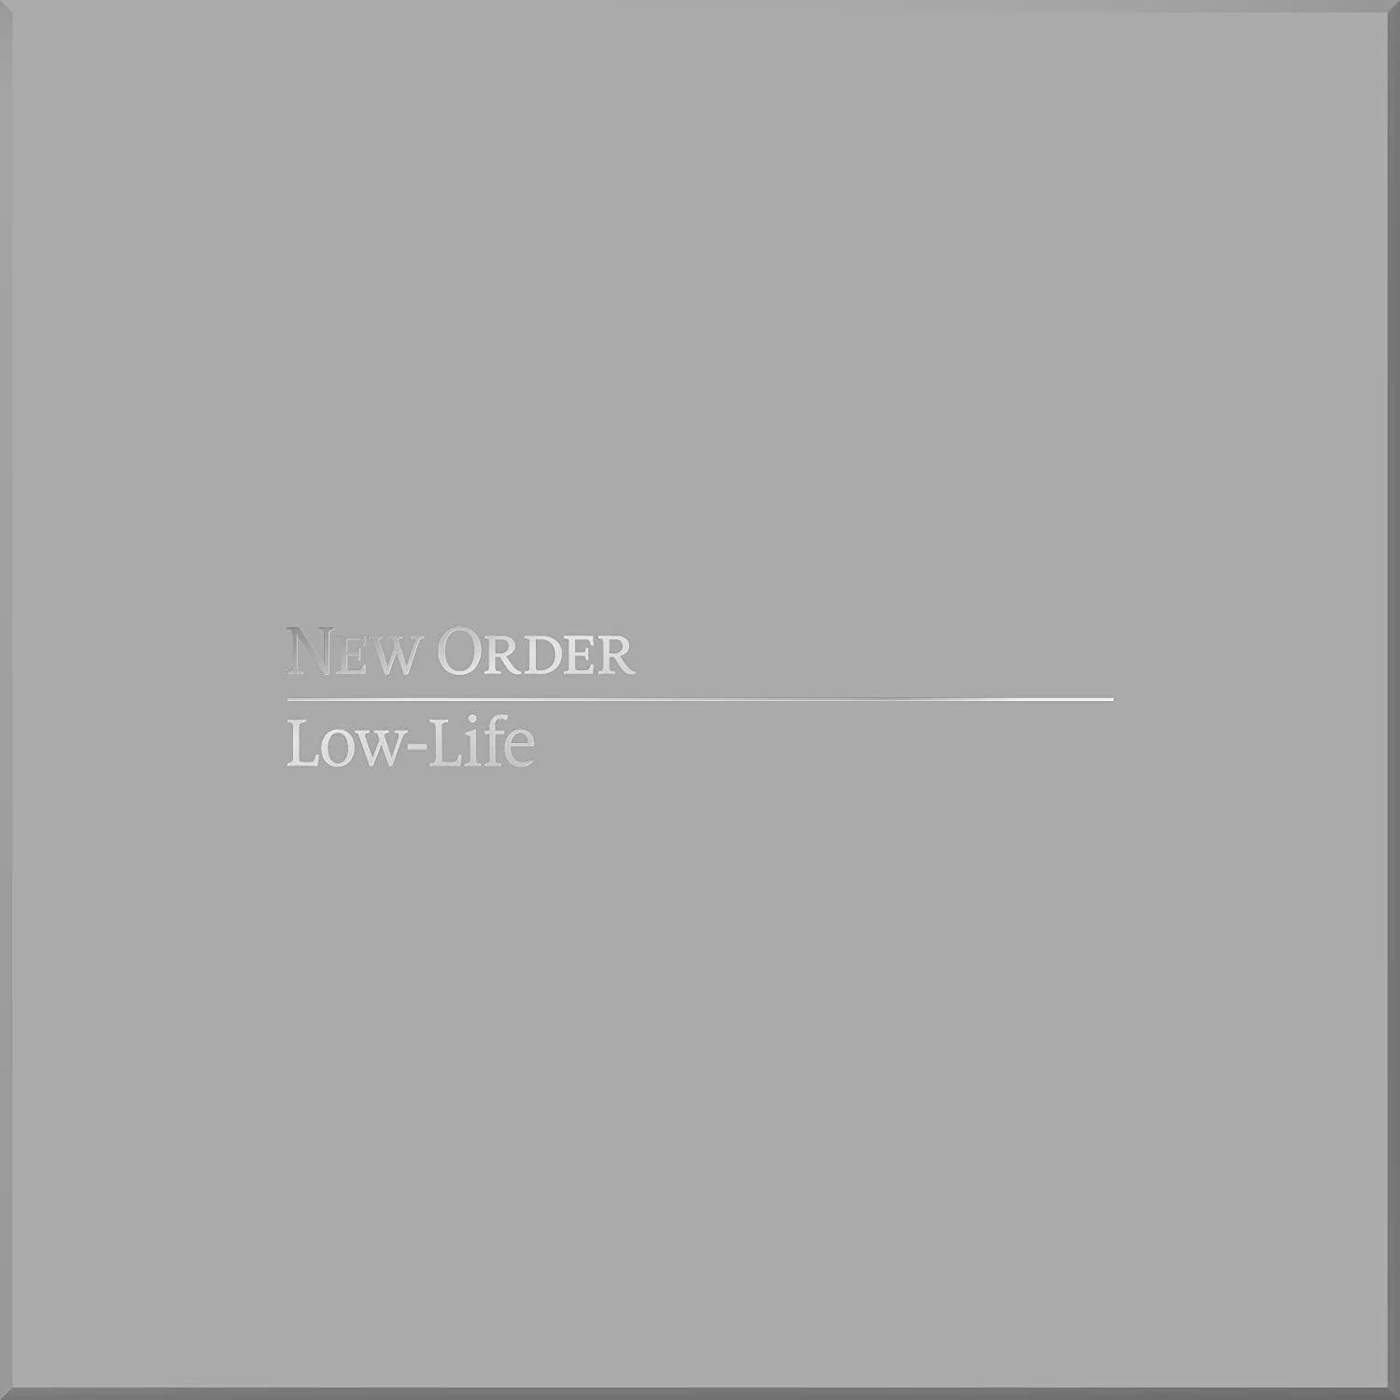 New Order: Low-Life Definitive Edition (180g LP/2CD/2DVD) Vinyl Record